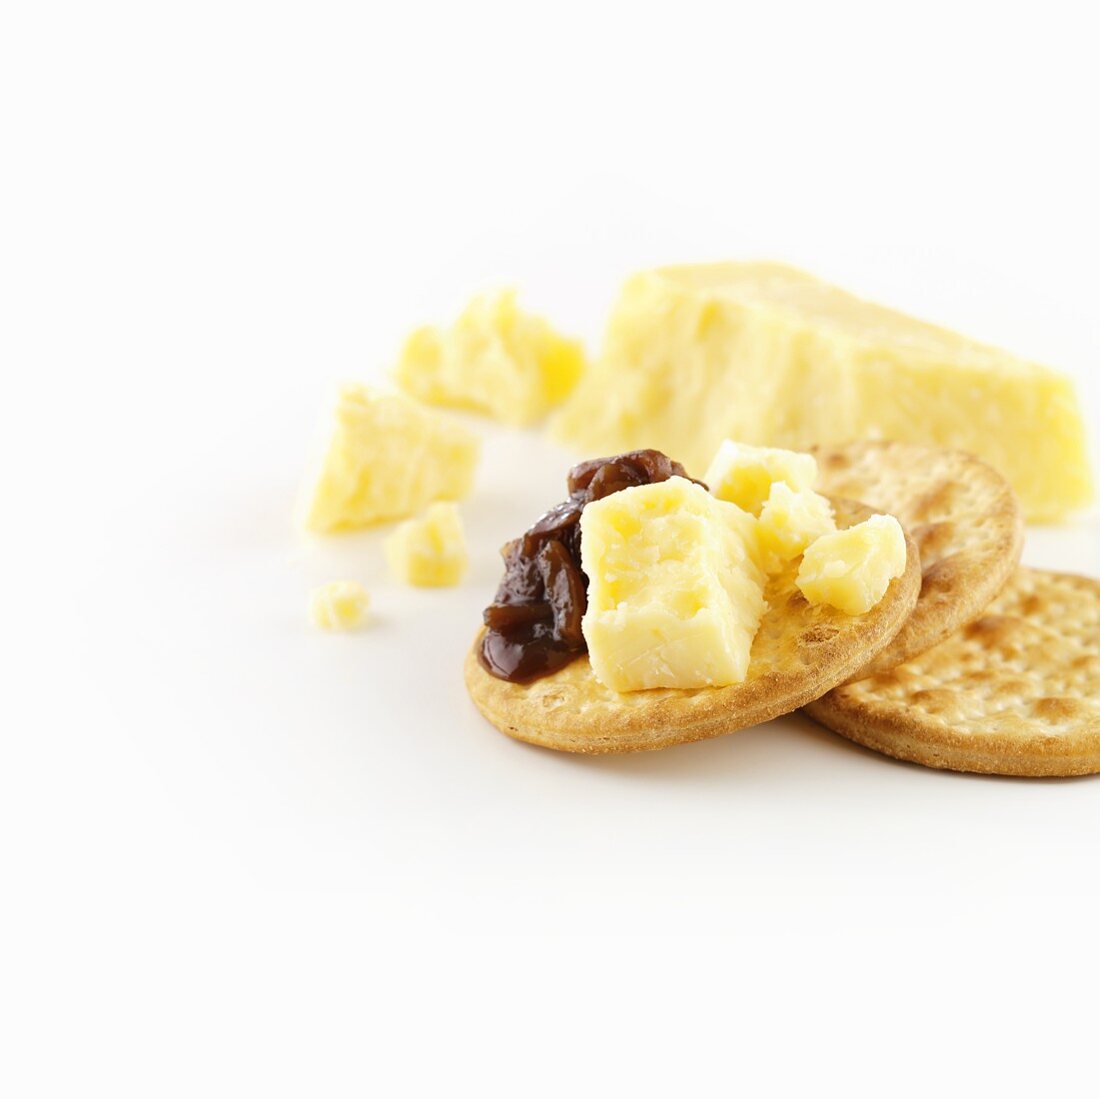 Vintage Cheddar cheese with onion chutney on cracker